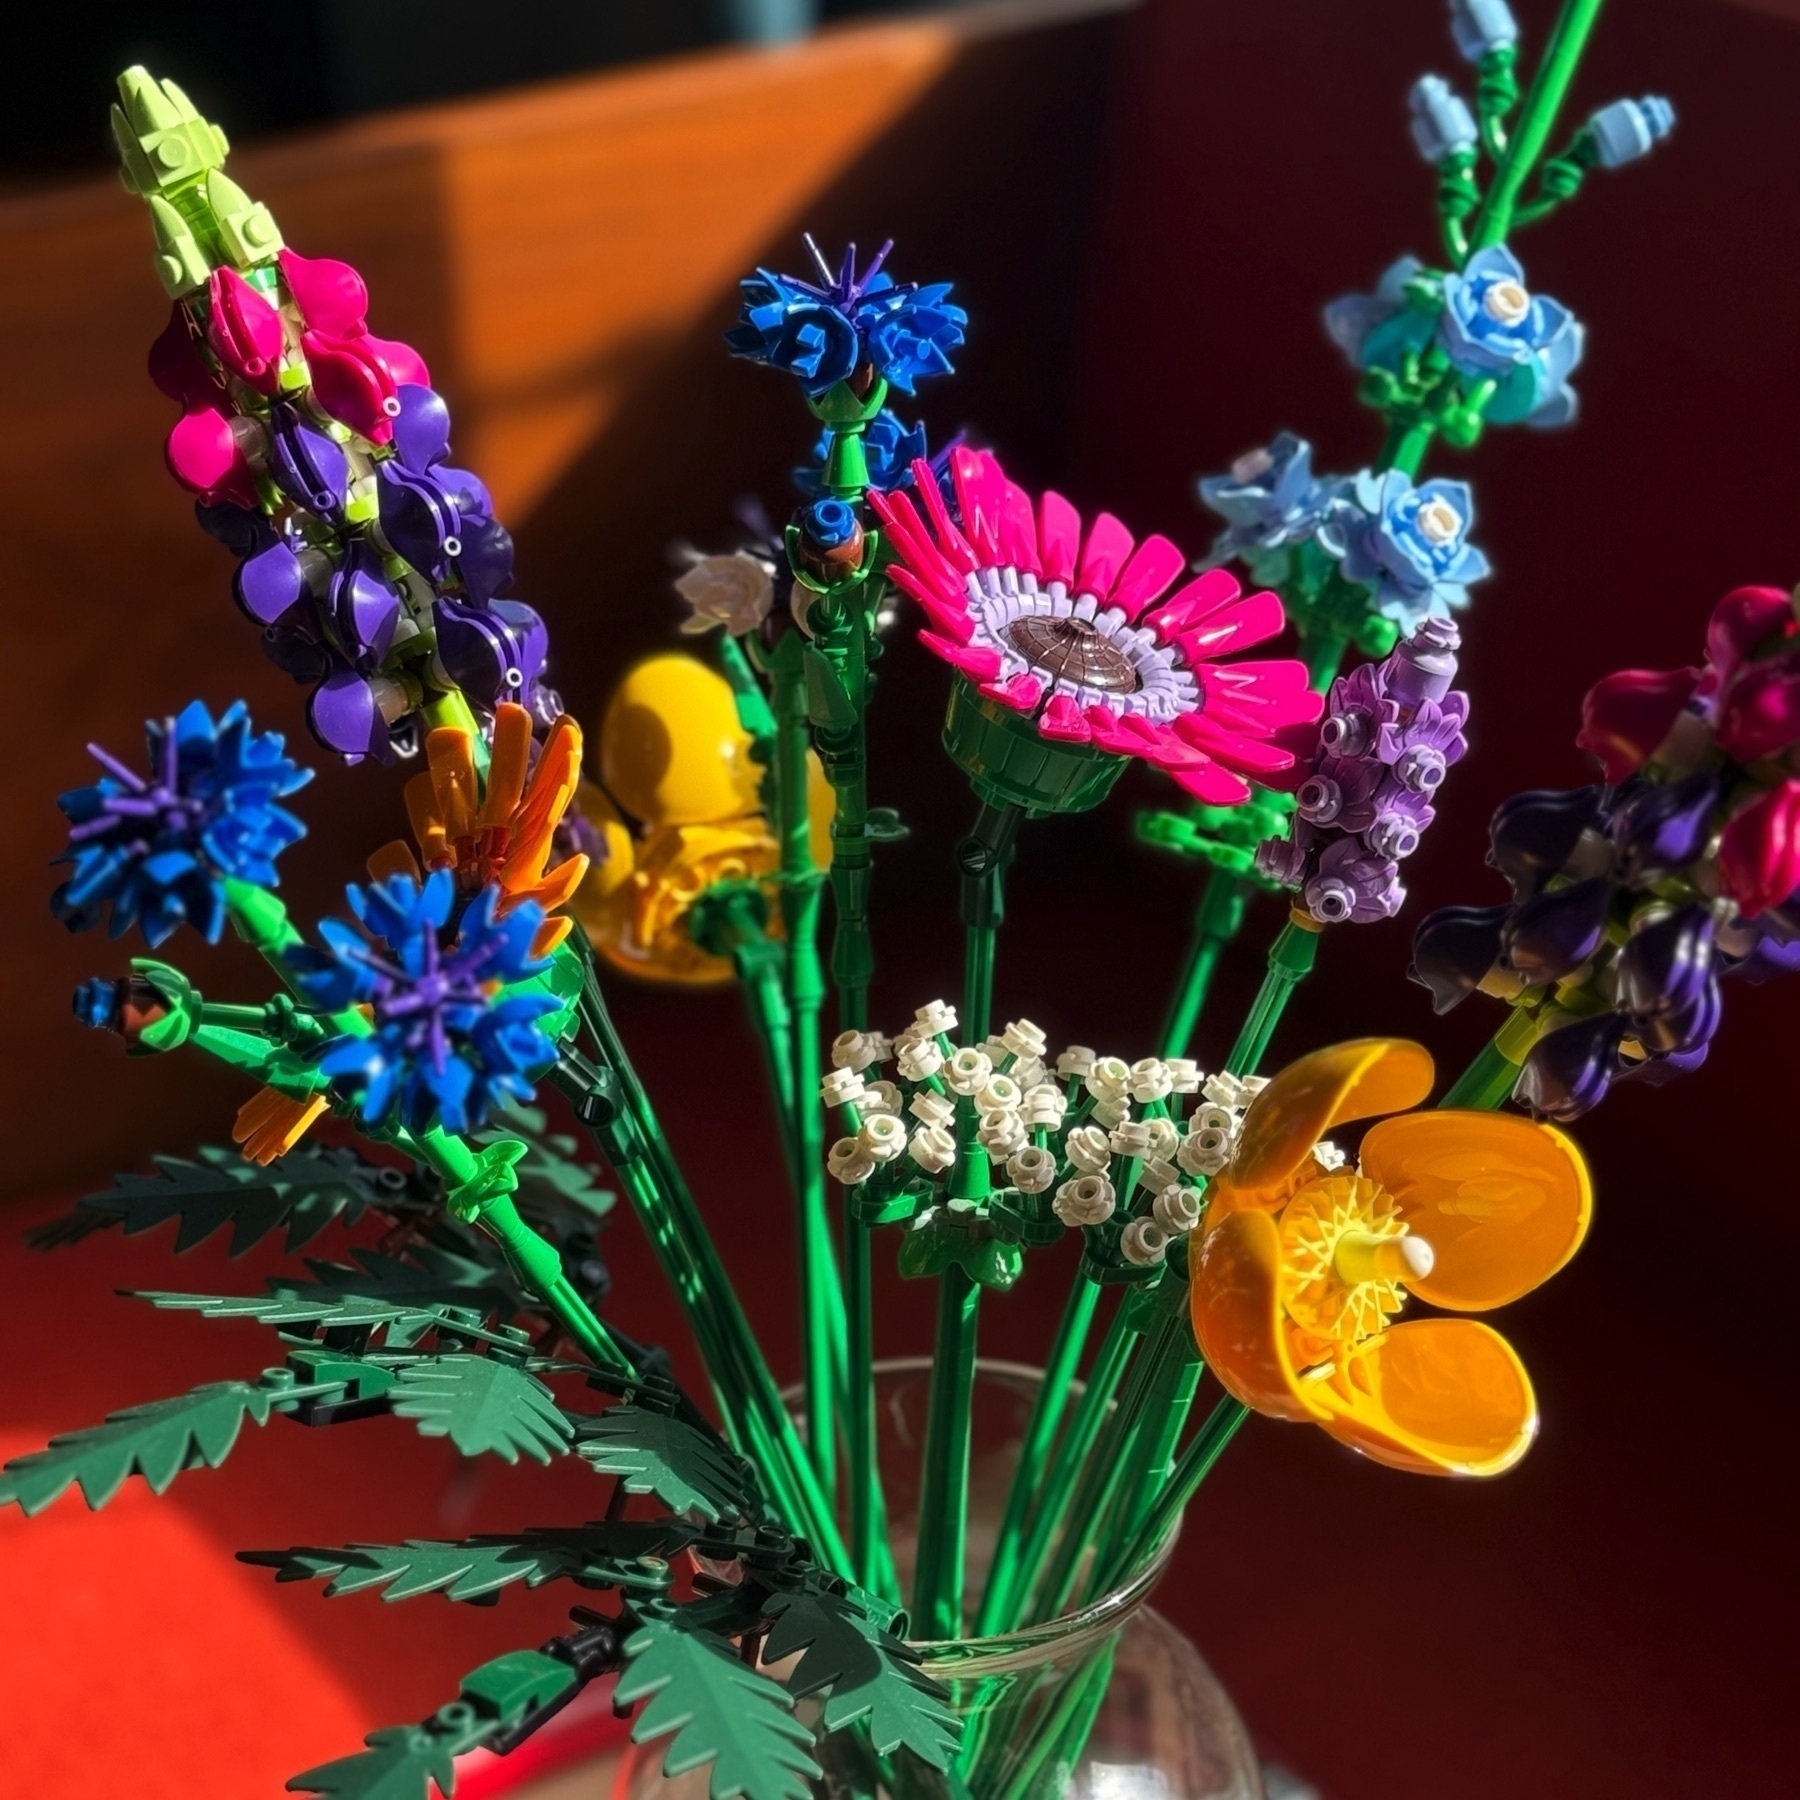 A bouquet of colorful wildflowers from the Lego Botanical Collection.